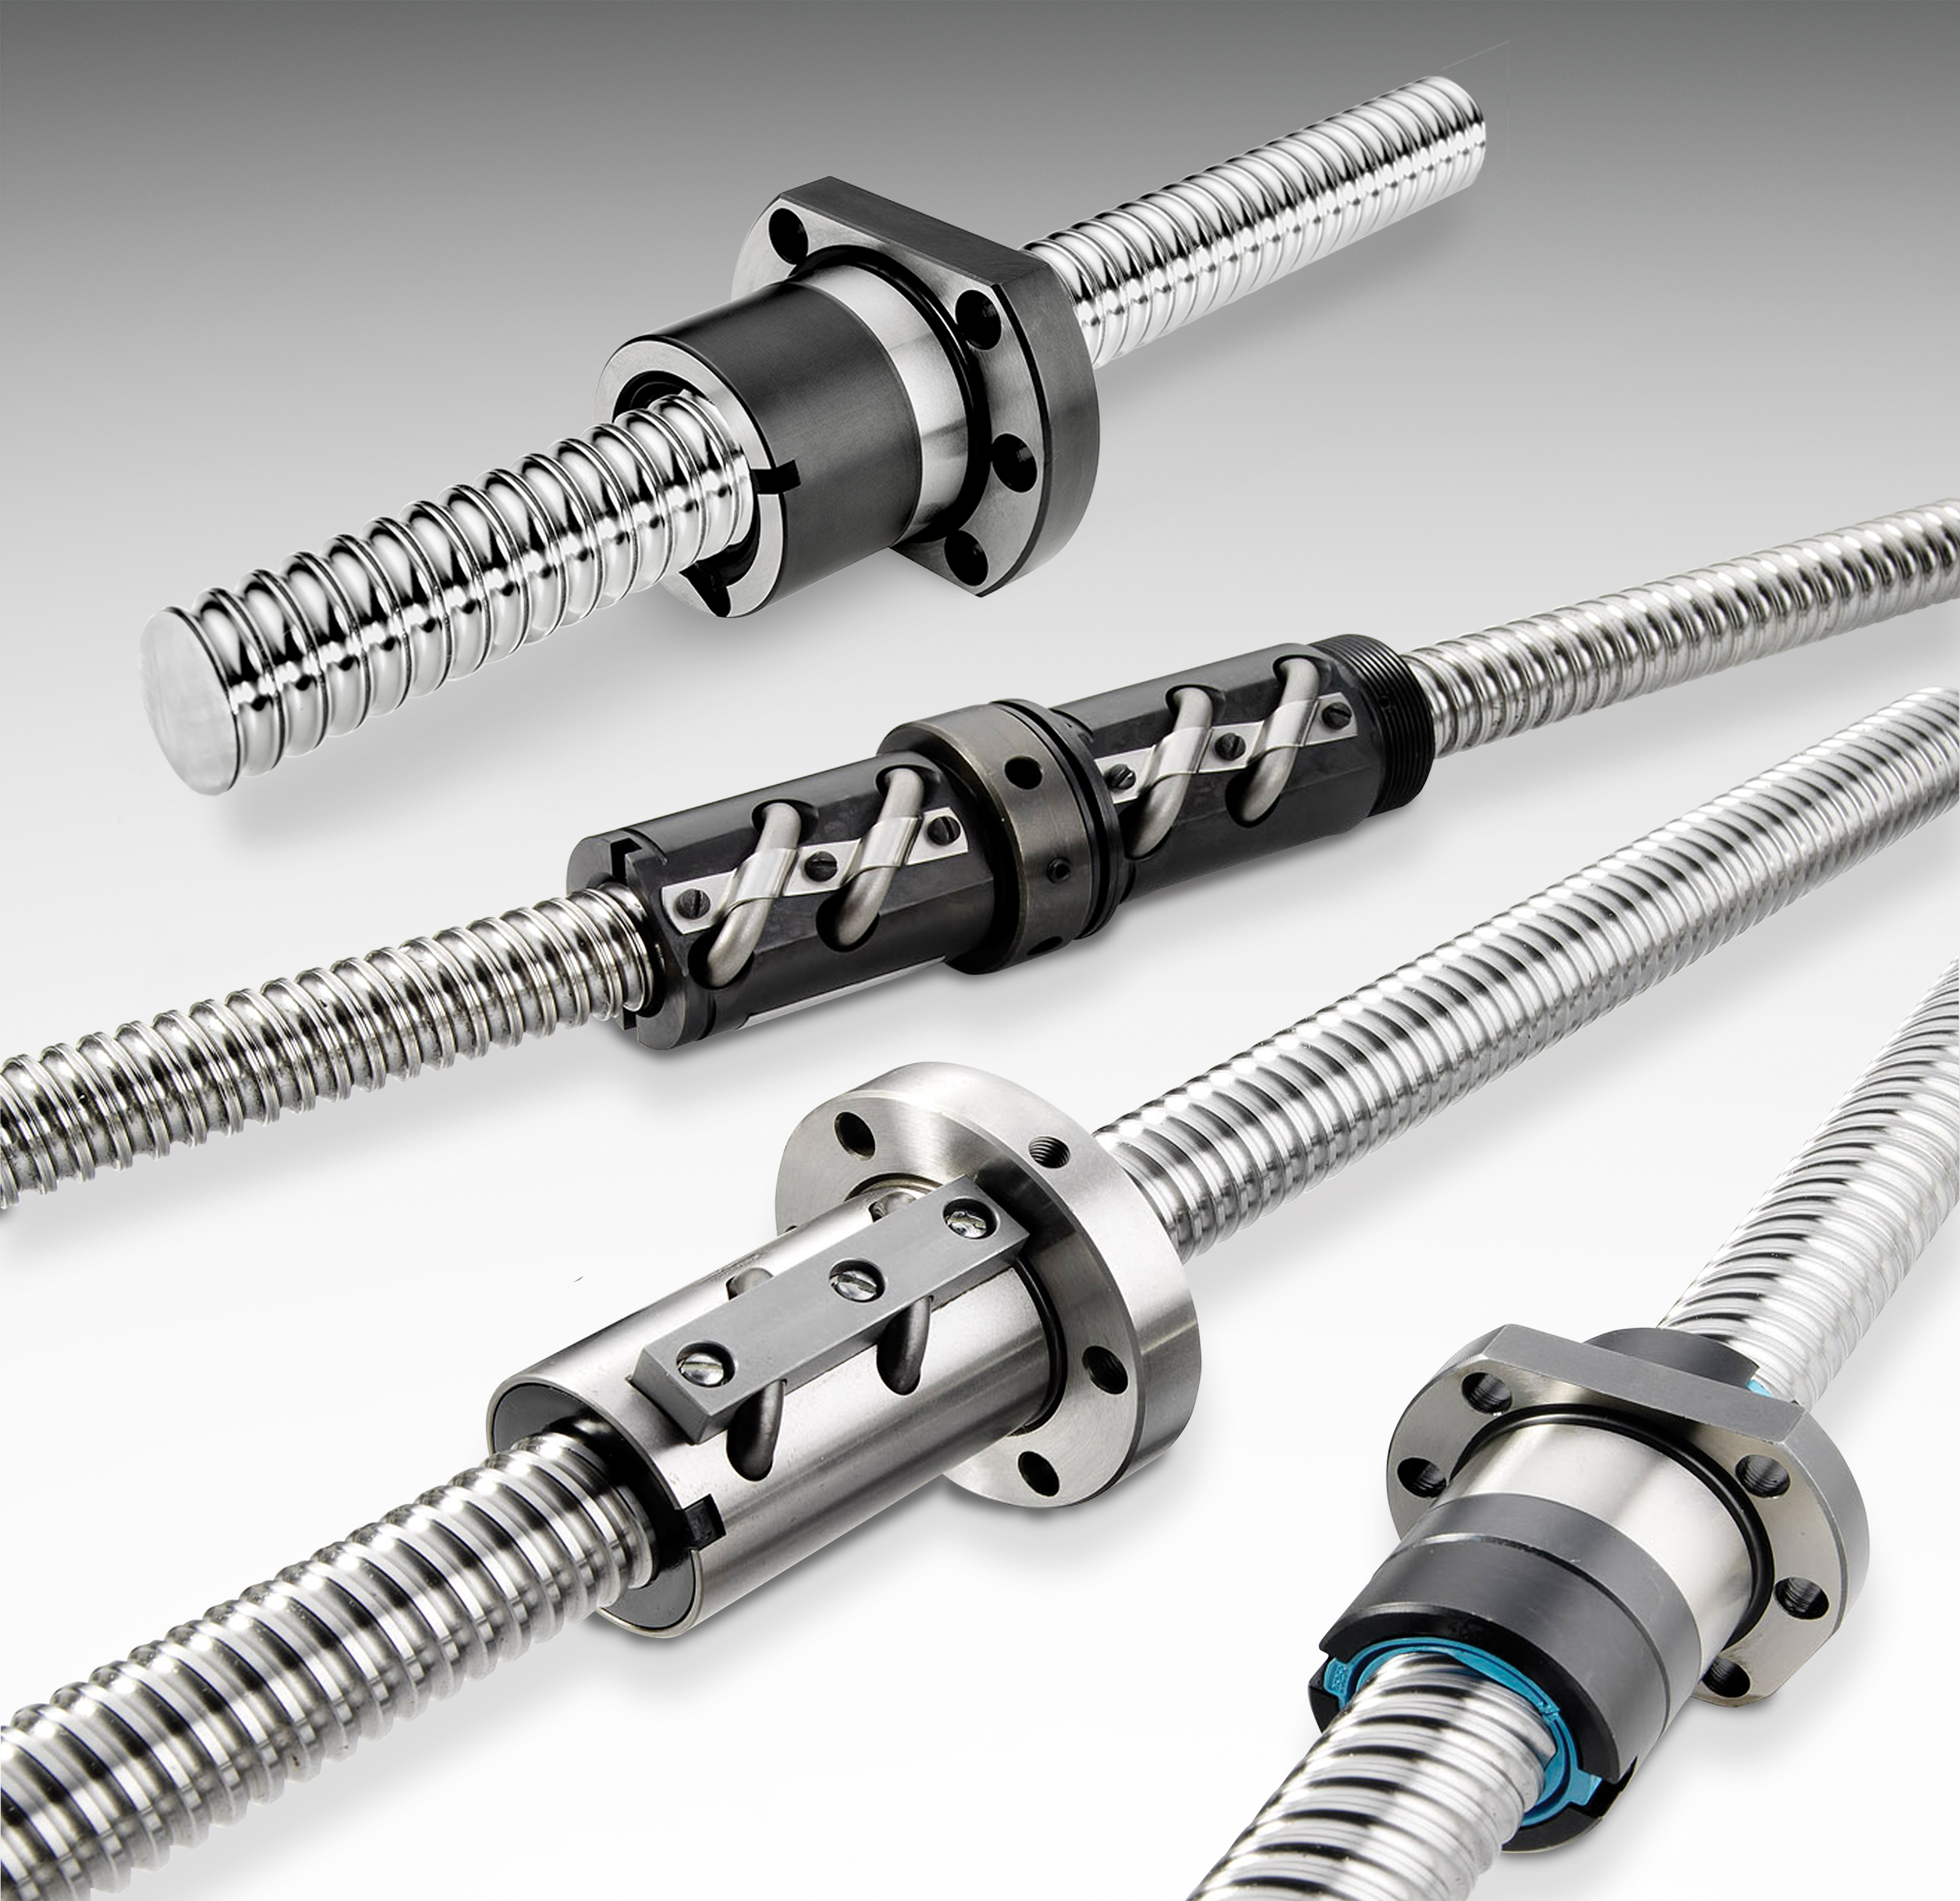 High-load ball screws from Thomson provide a long service life.